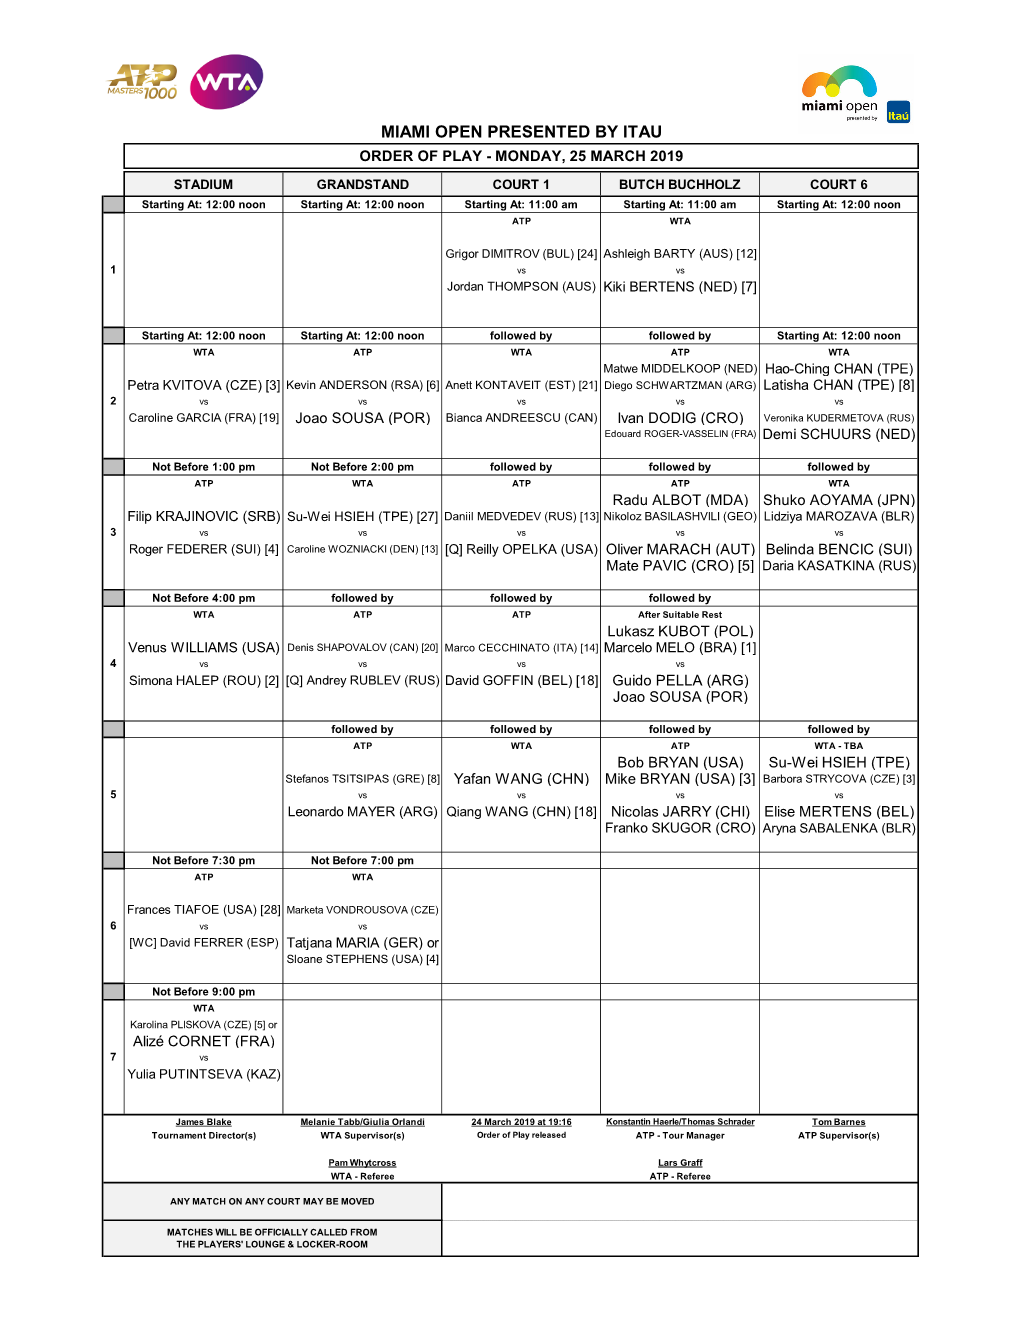 Miami Open Presented by Itau Order of Play - Monday, 25 March 2019